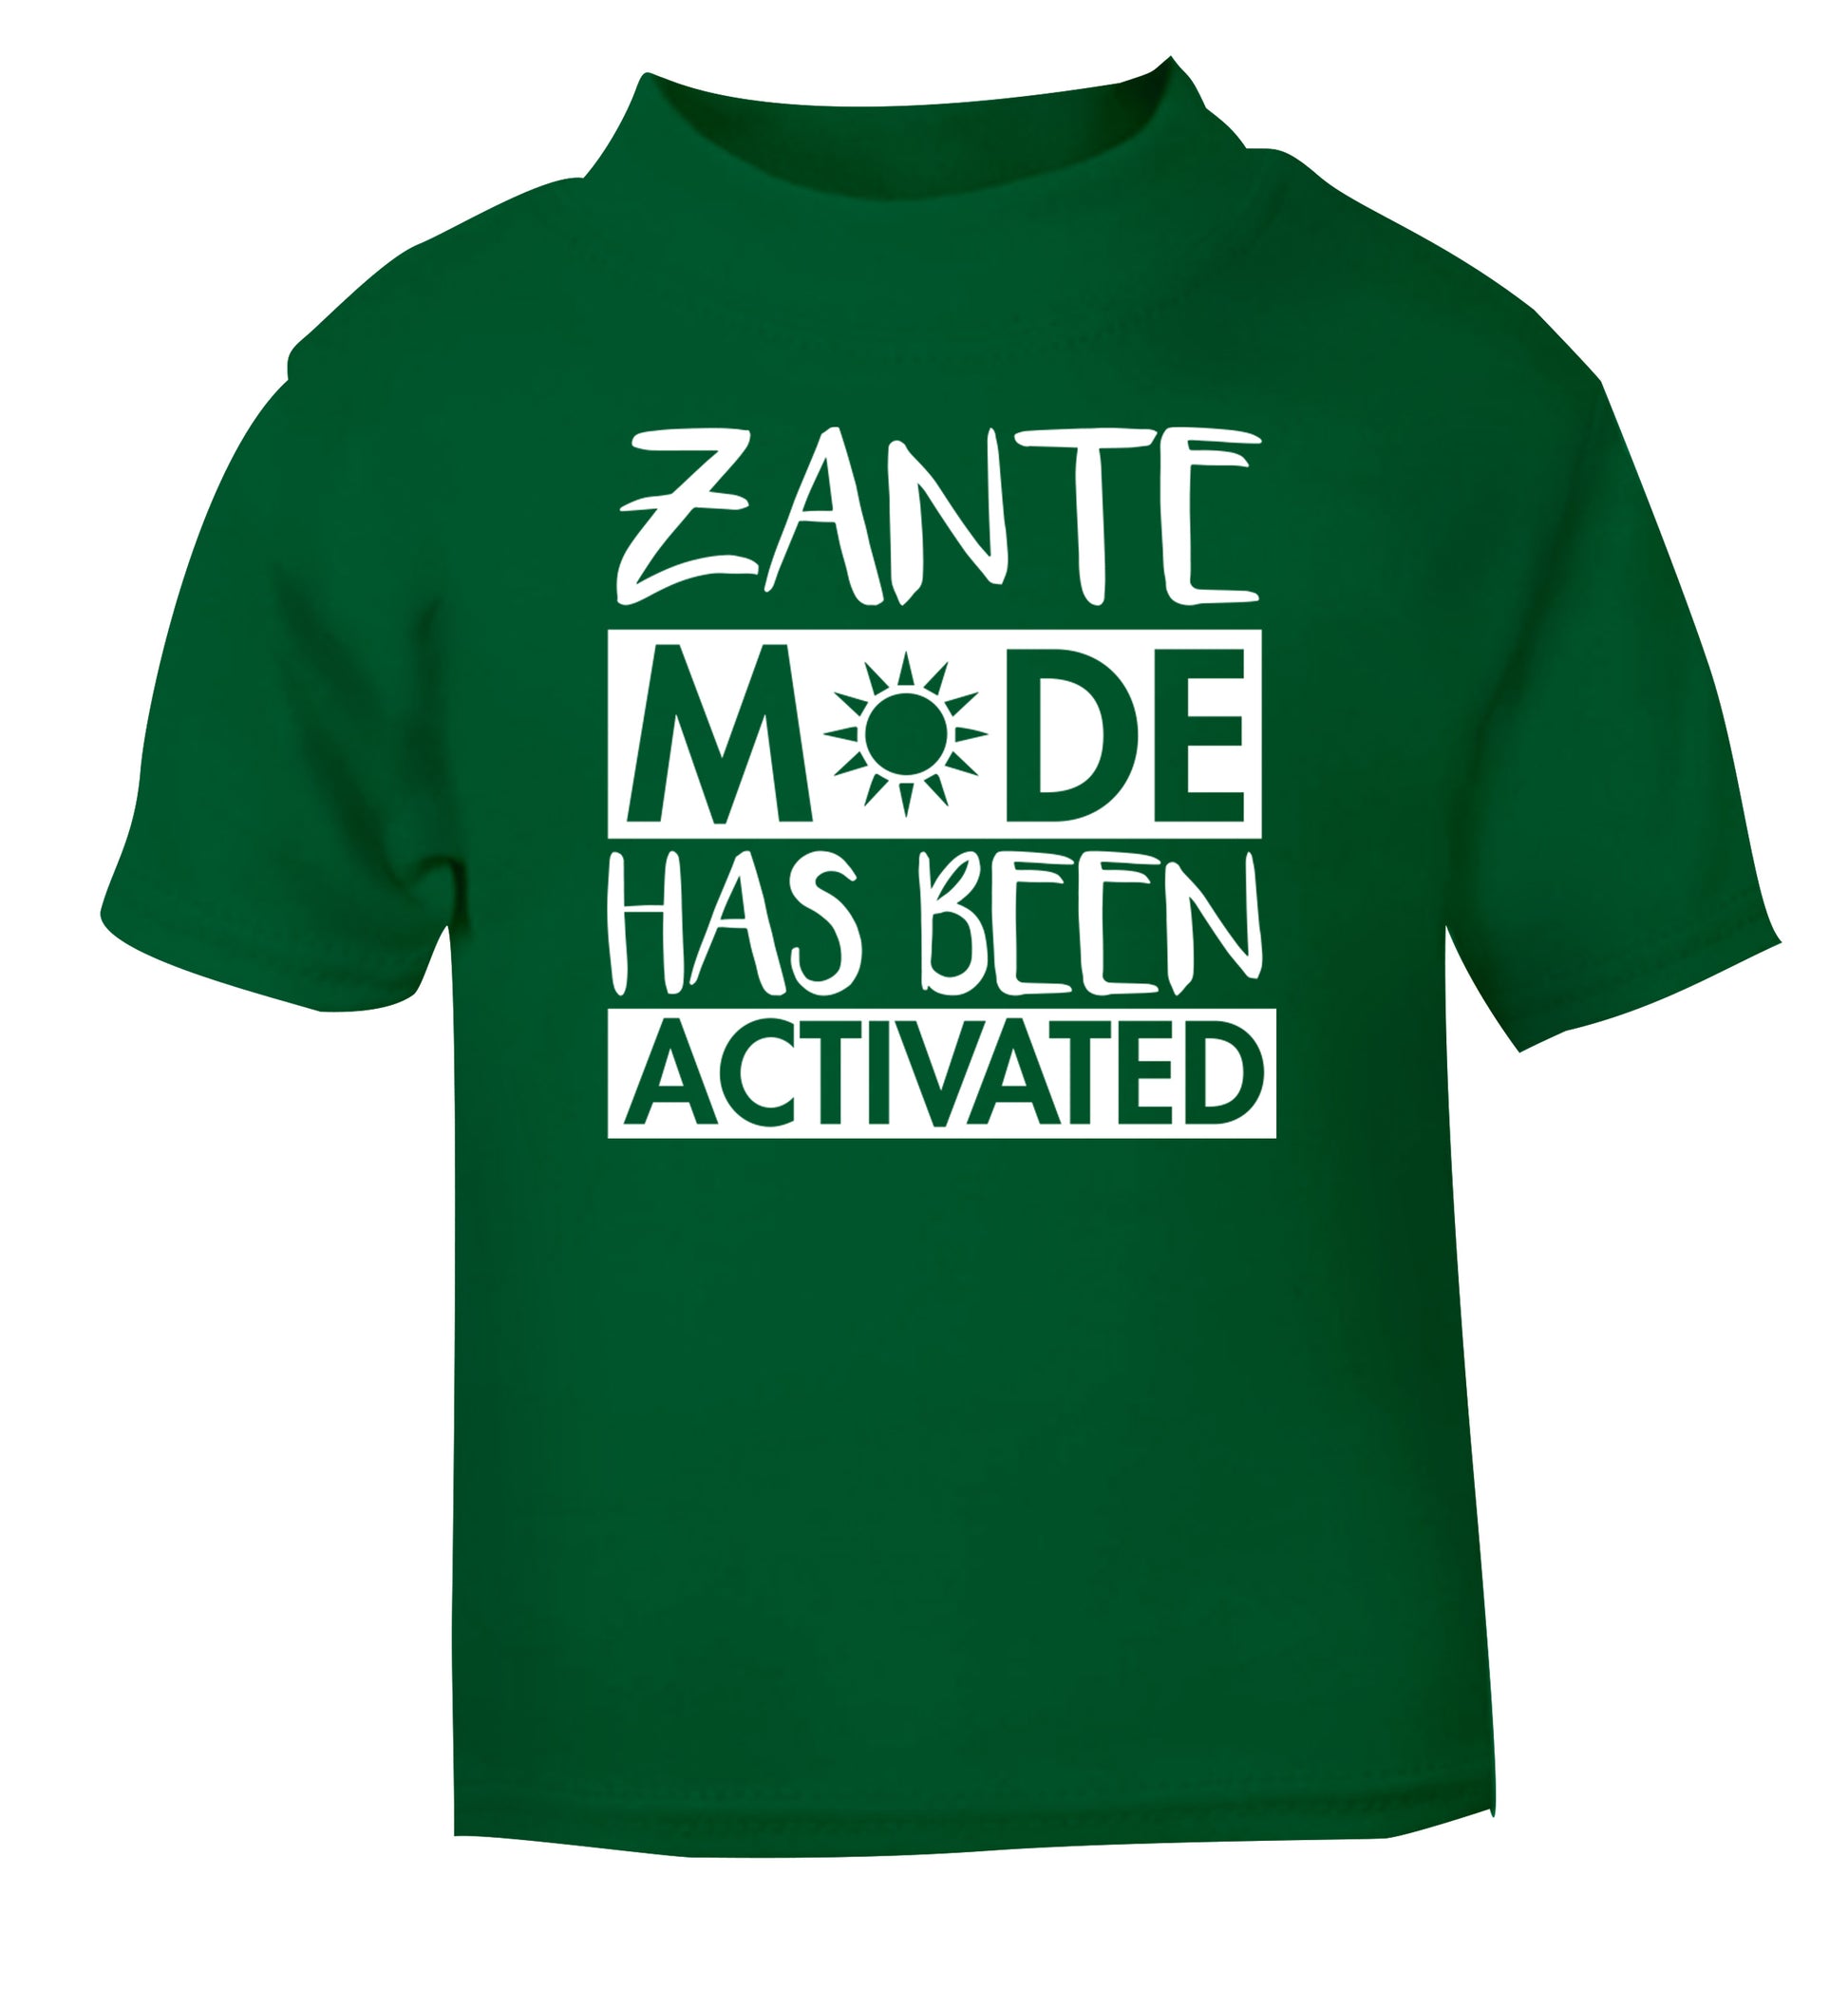 Zante mode has been activated green Baby Toddler Tshirt 2 Years